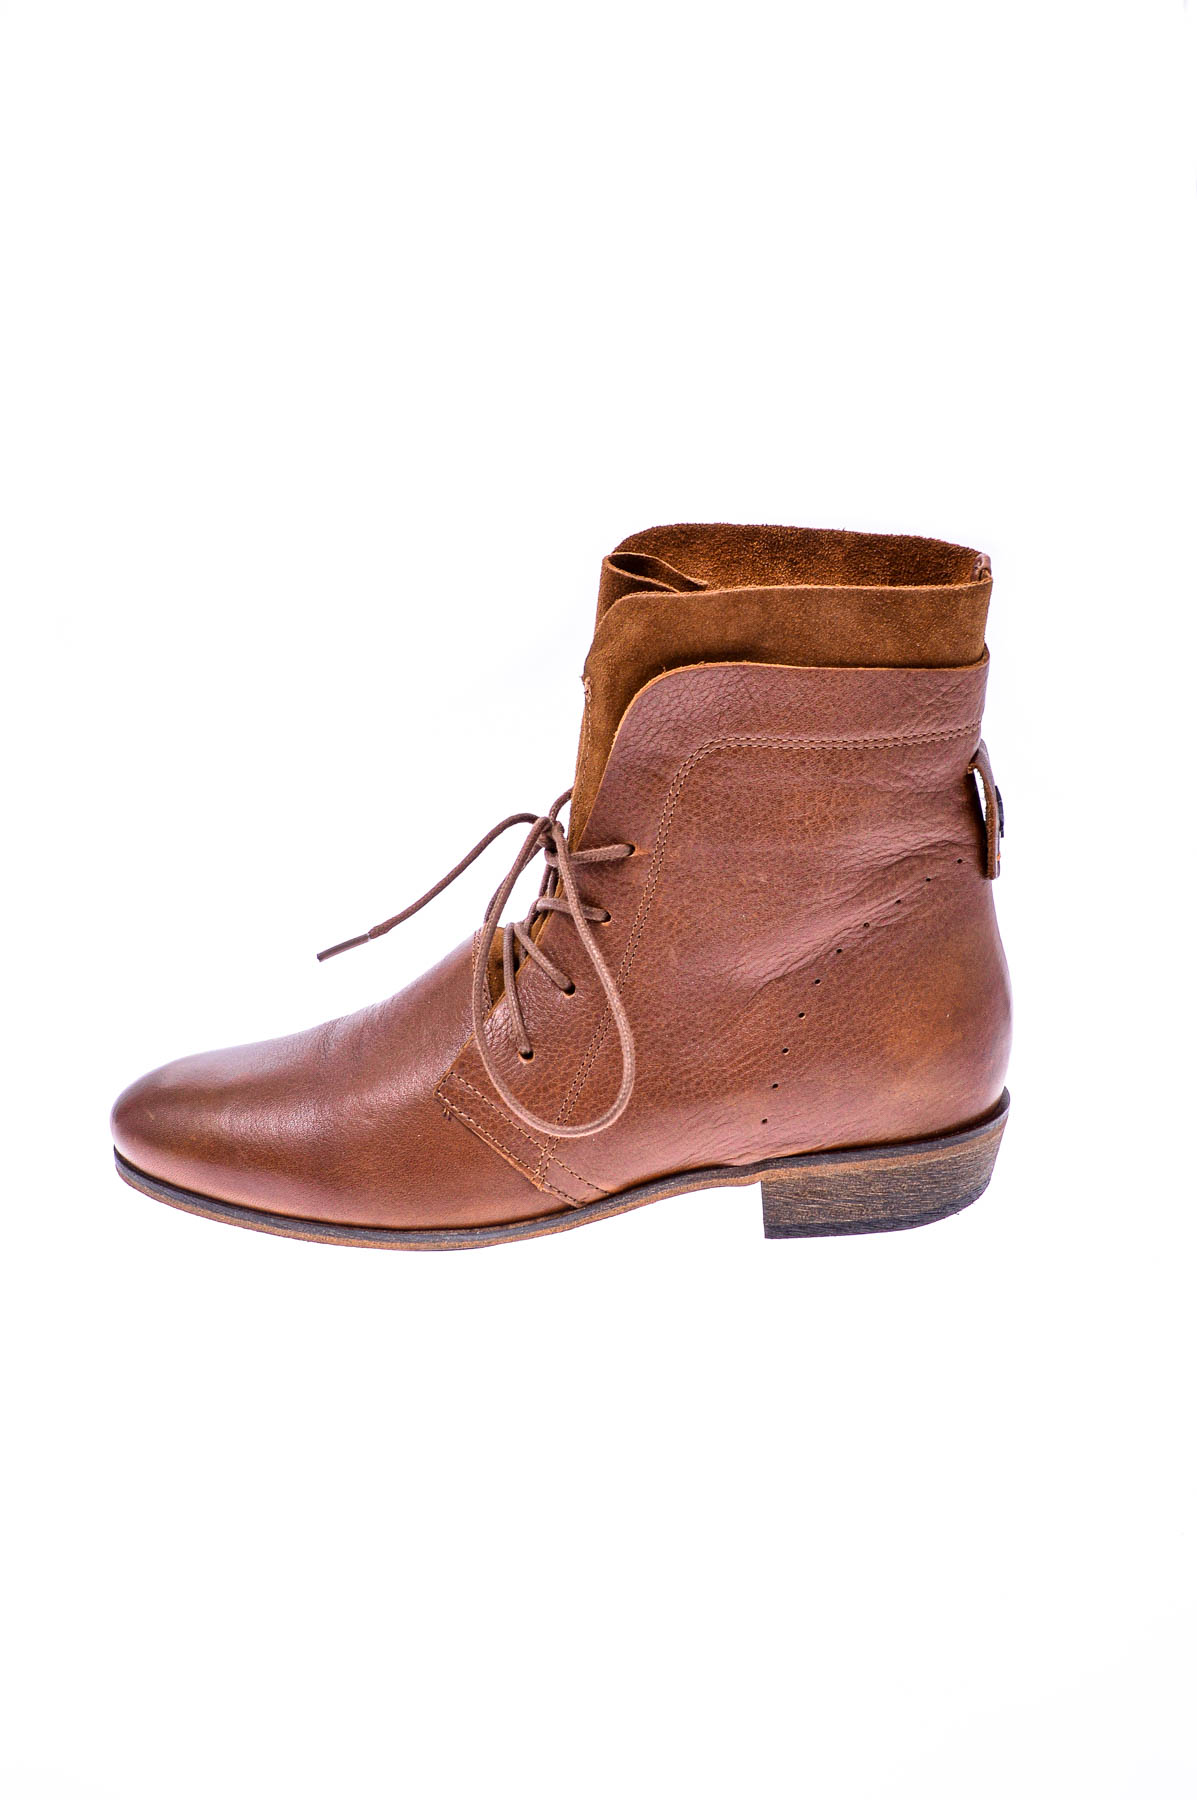 Women's boots - Haghe by HUB - 0